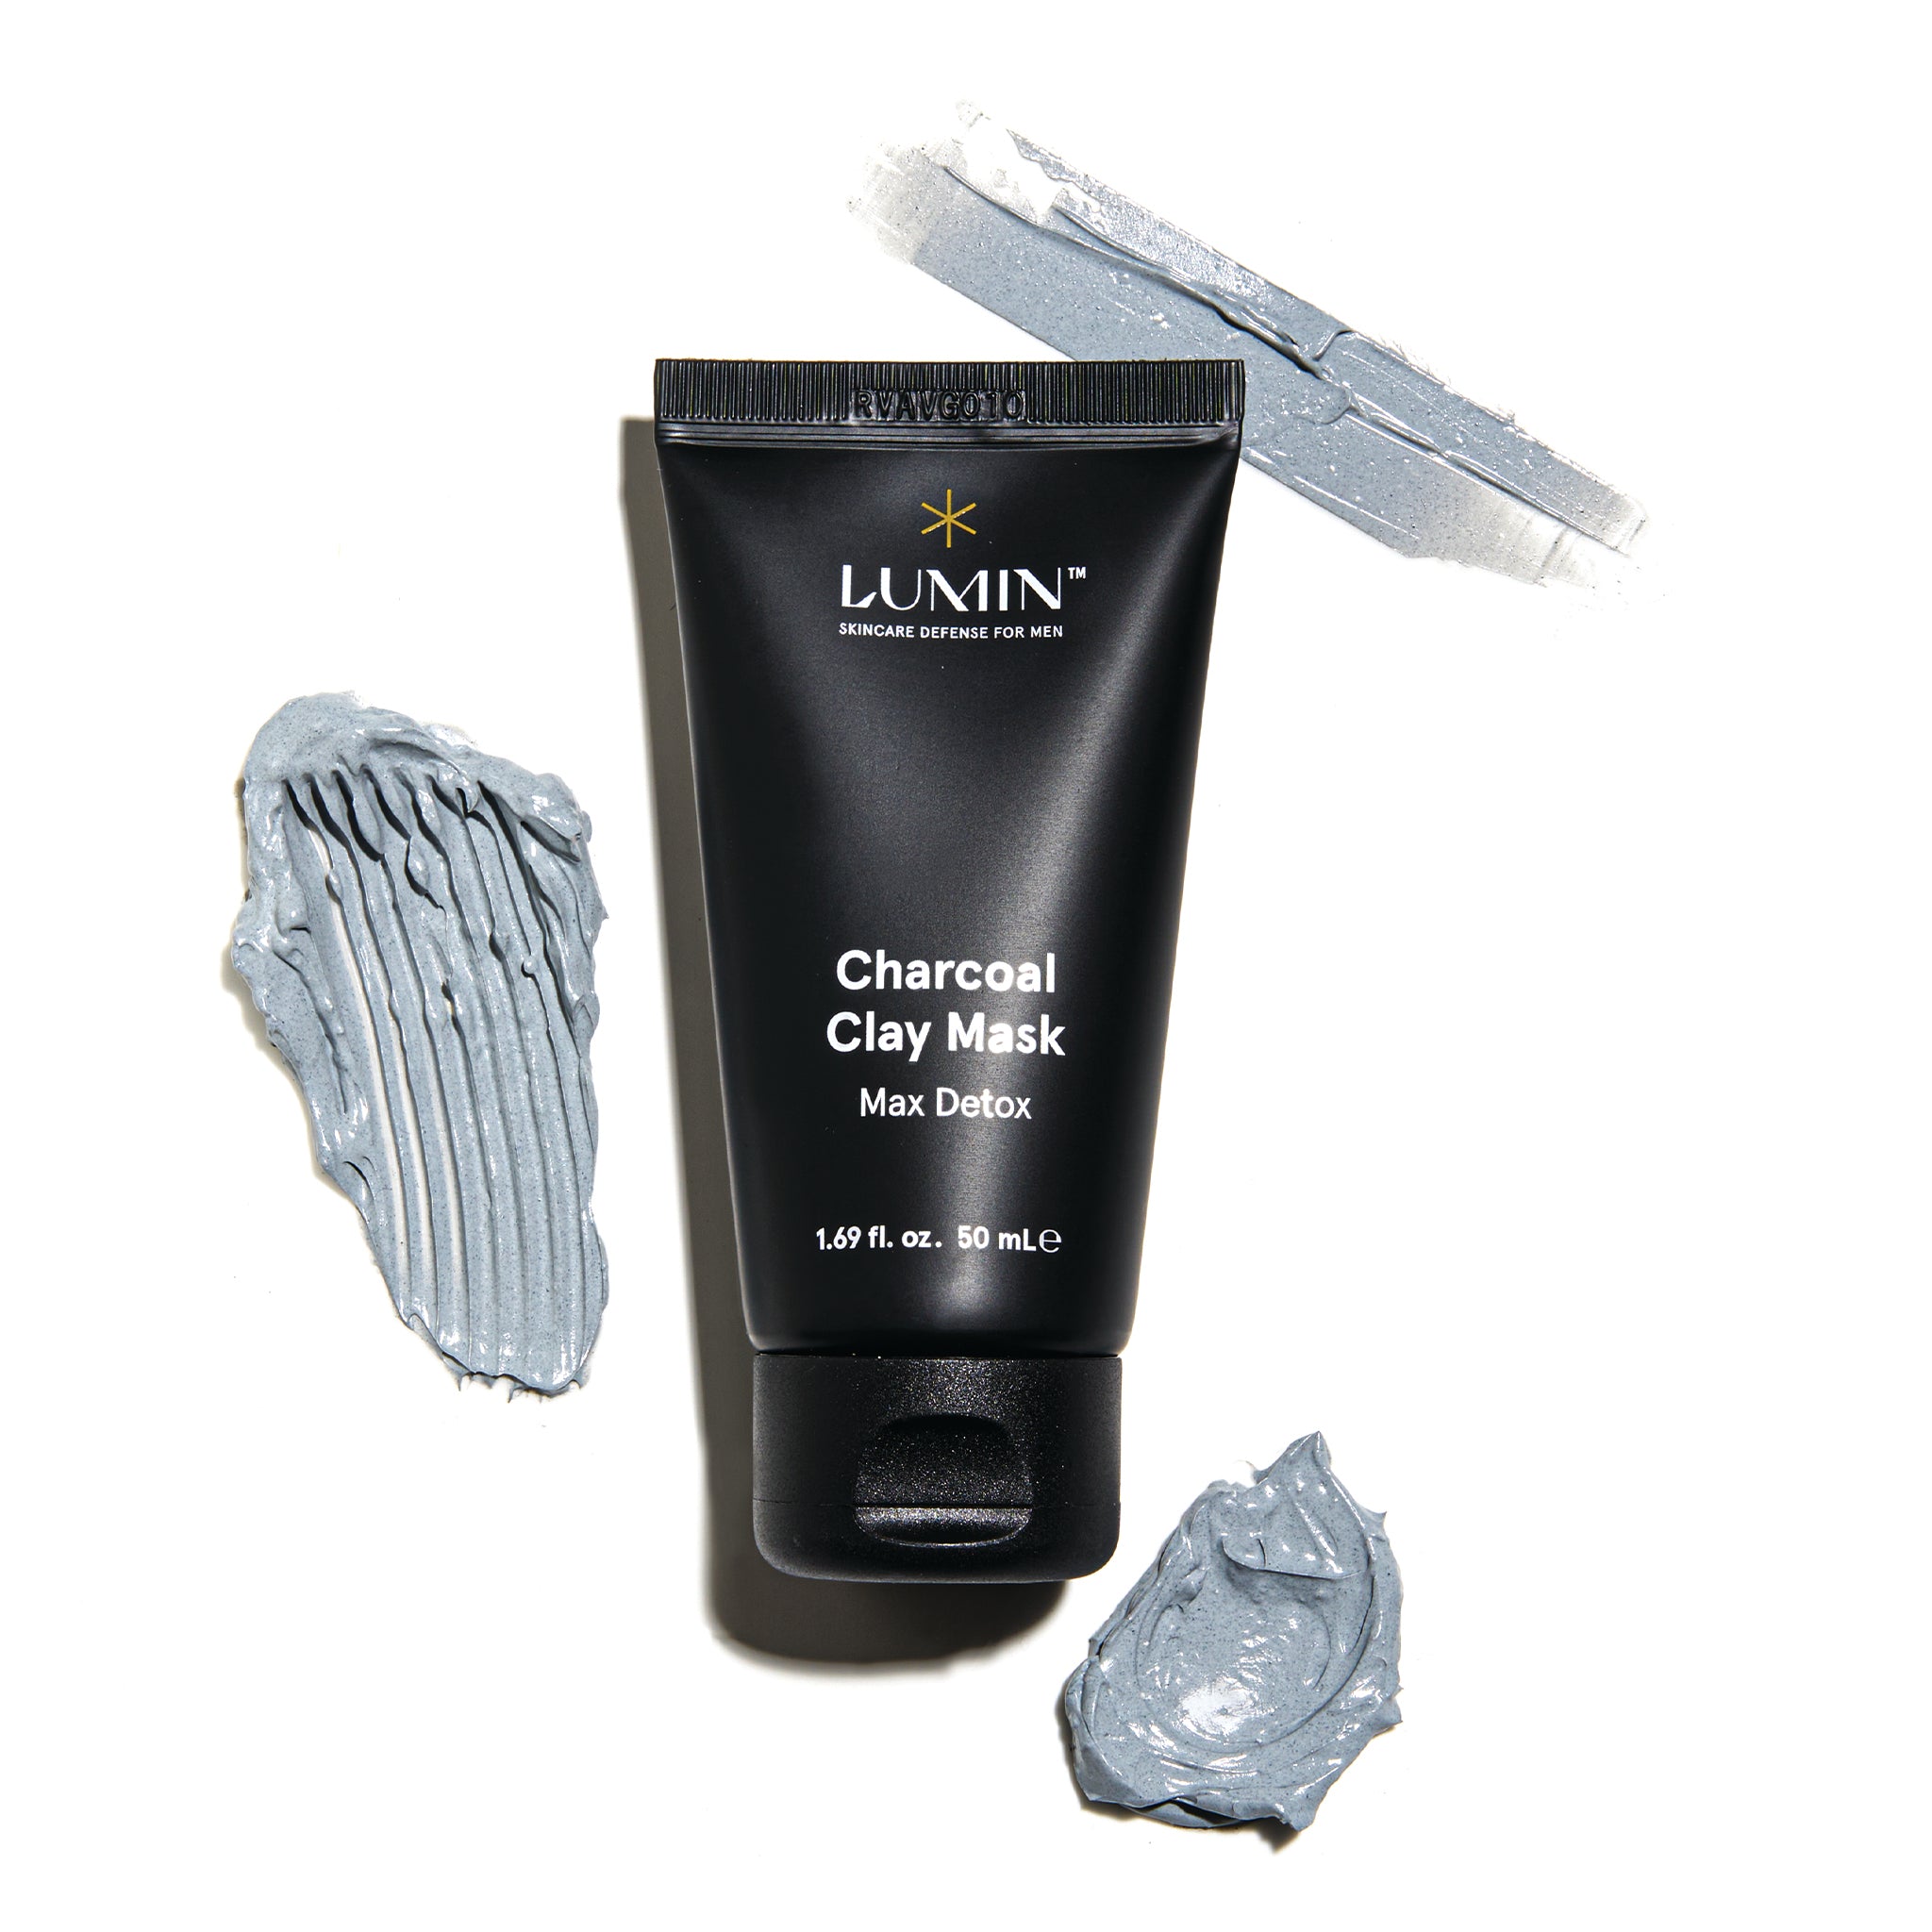 Charcoal Clay Mask Max Detox with cream